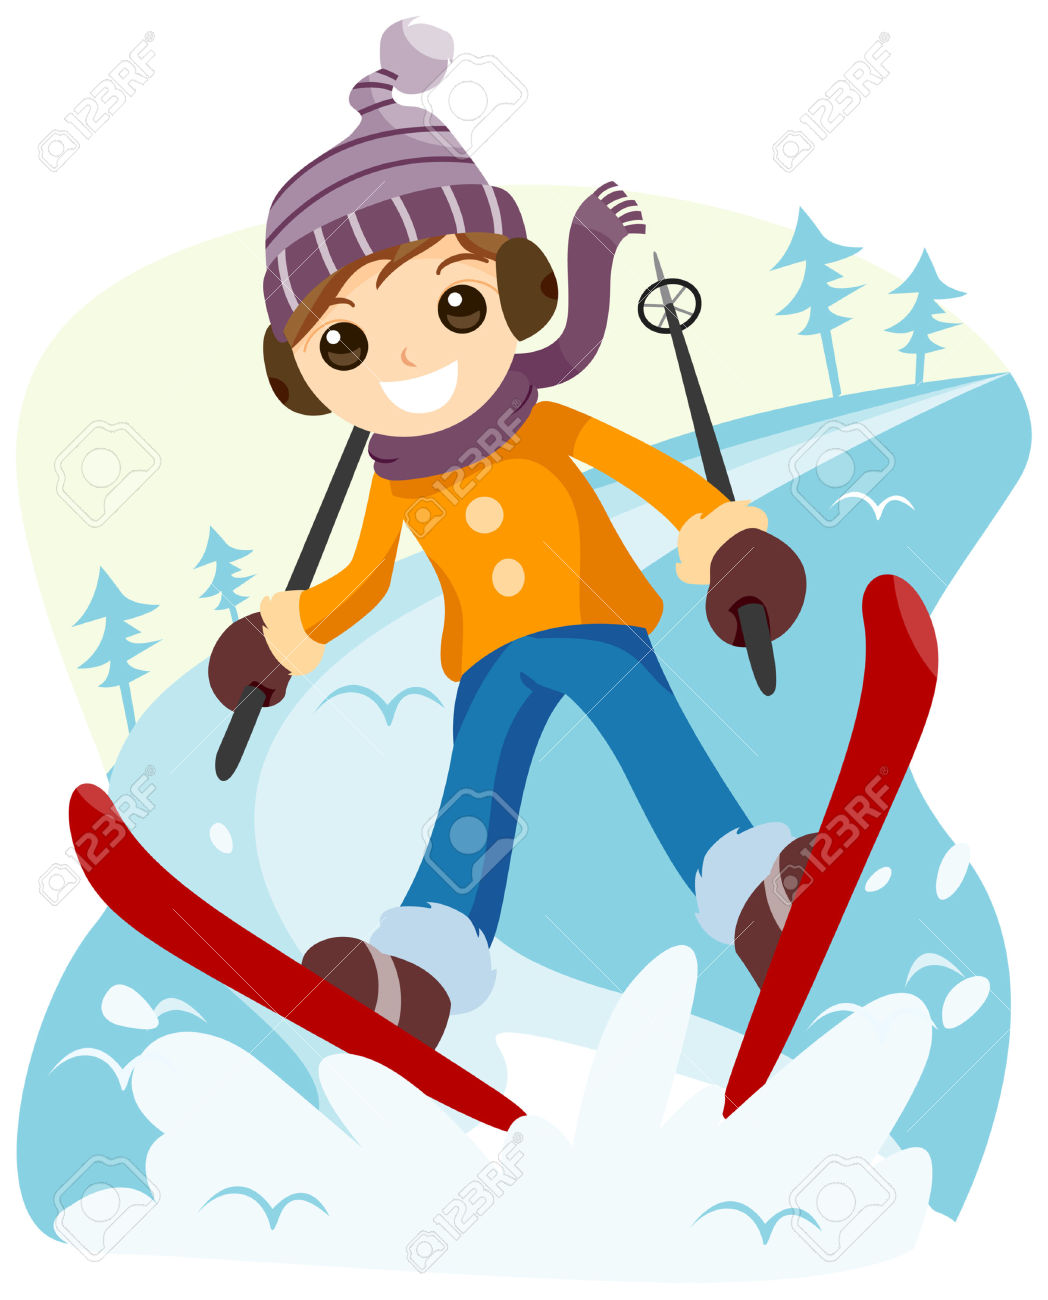 Snow skiing clipart 